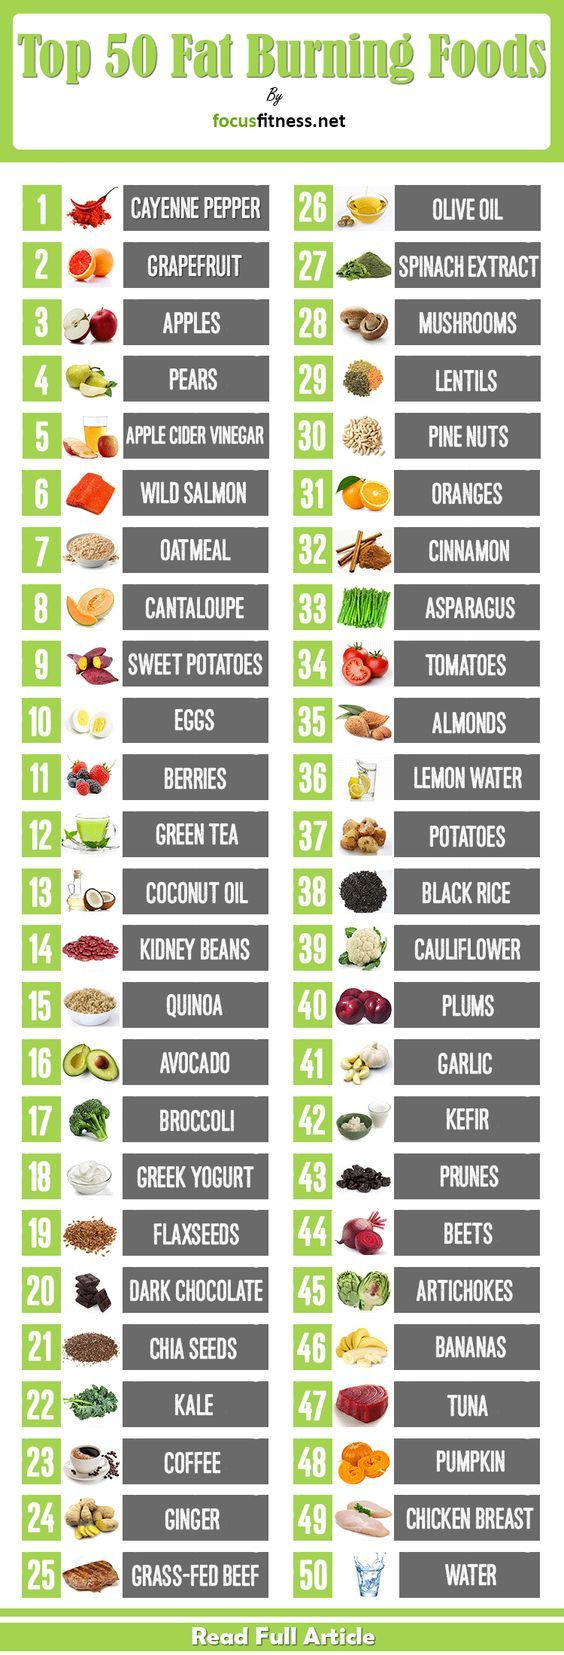 Fat Burning Foods Recipes Diet Plans
 Pin on EASY FOOD TIPS